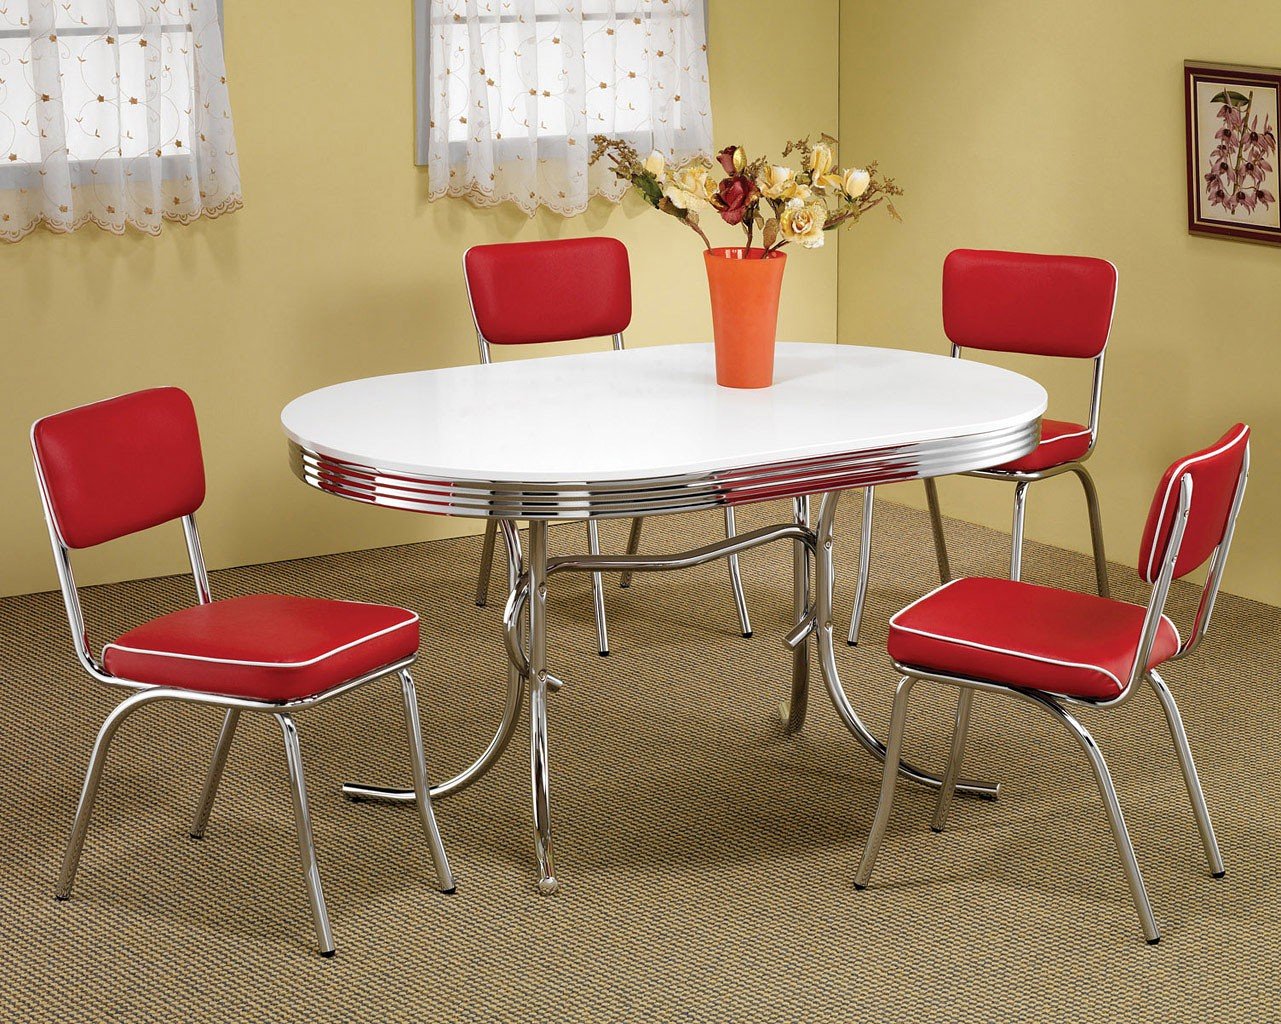 Retro Dining Room Set W Red Chairs By Coaster Furniture Furniturepick